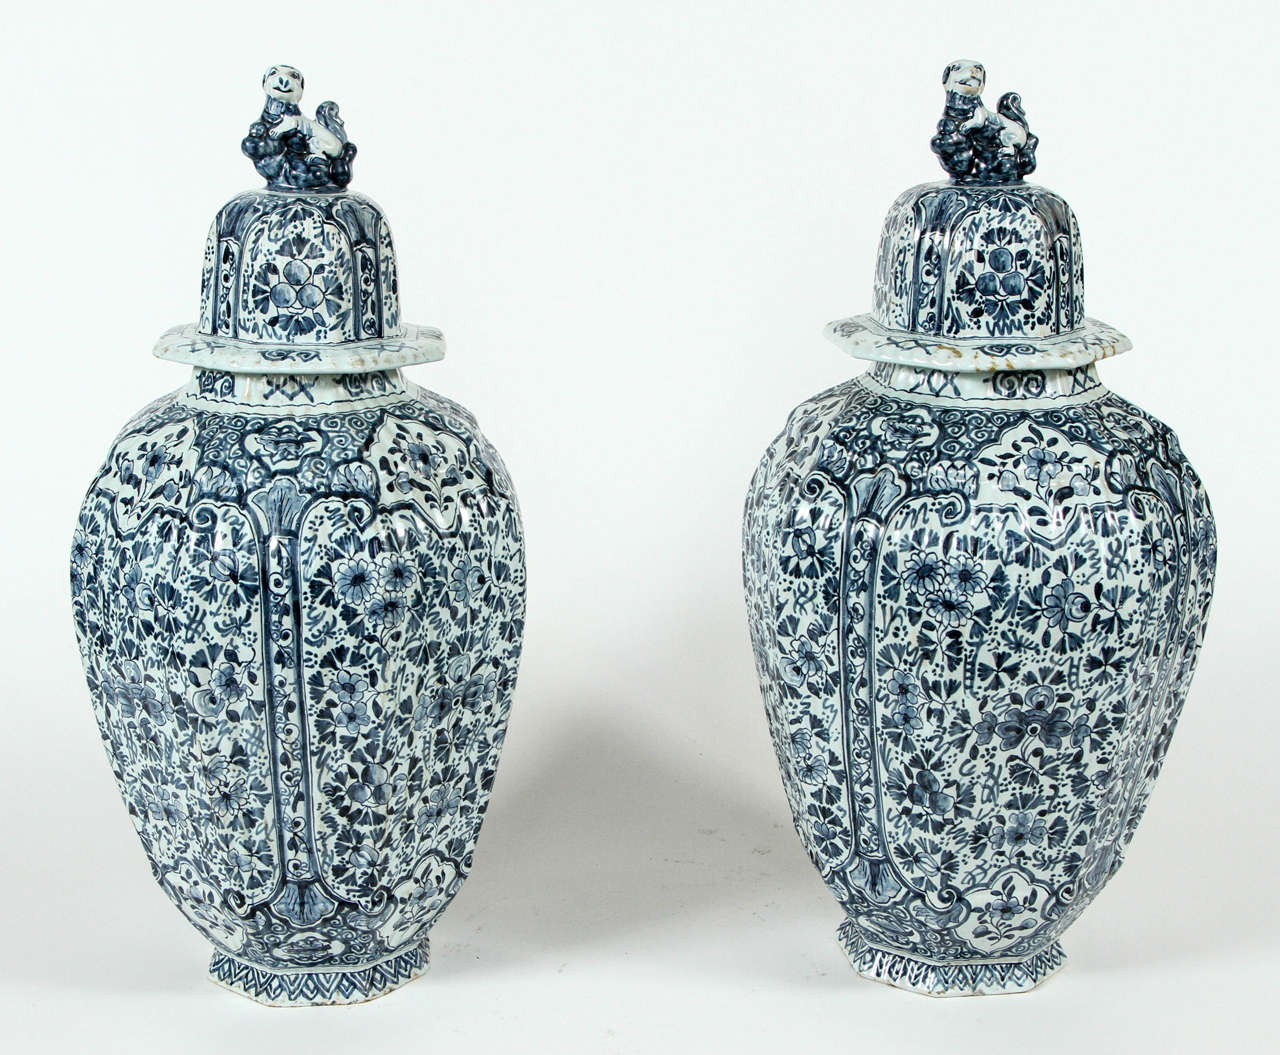 A Pair of Large Delft Blue and White Ginger Jars and Covers, c. 1800.  With original tops and finials, very unusual to find intact at this age.